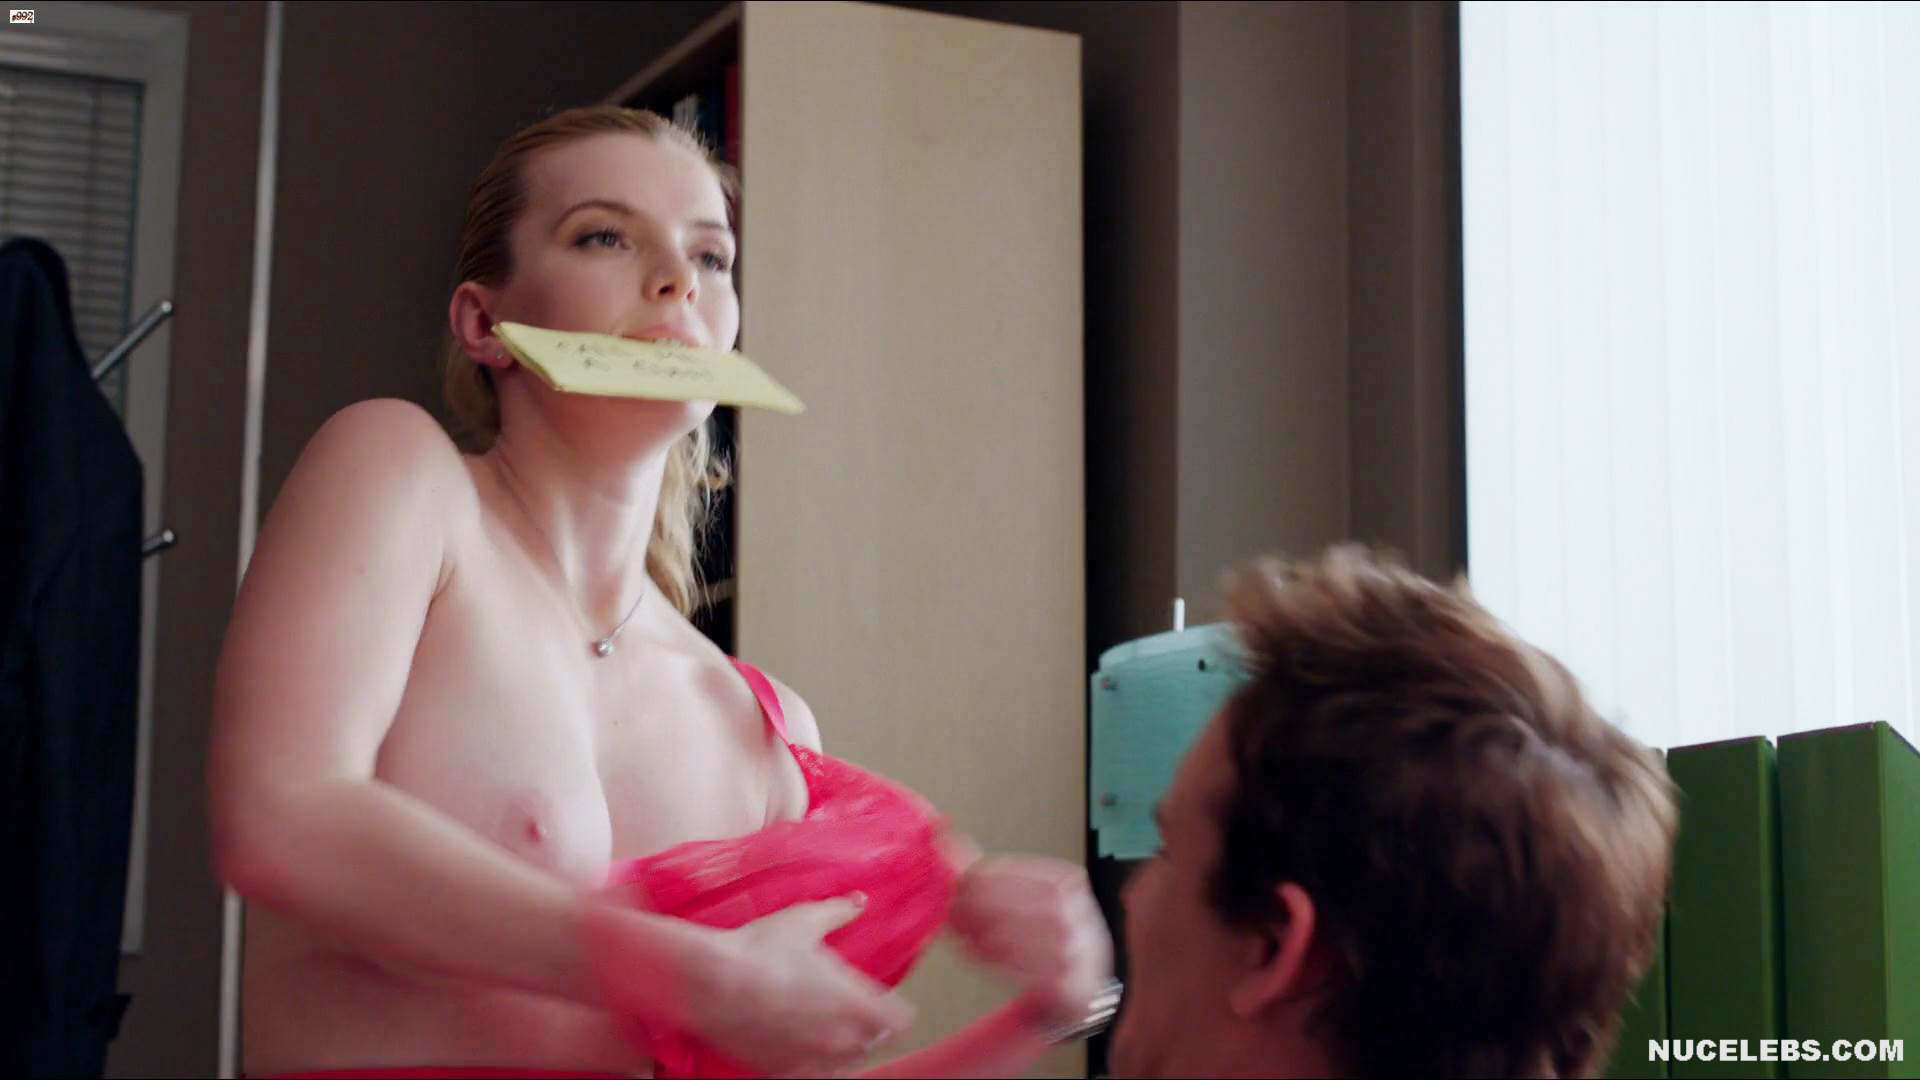 Betty Gilpin nude, topless pictures, playboy photos, sex scene uncensored.